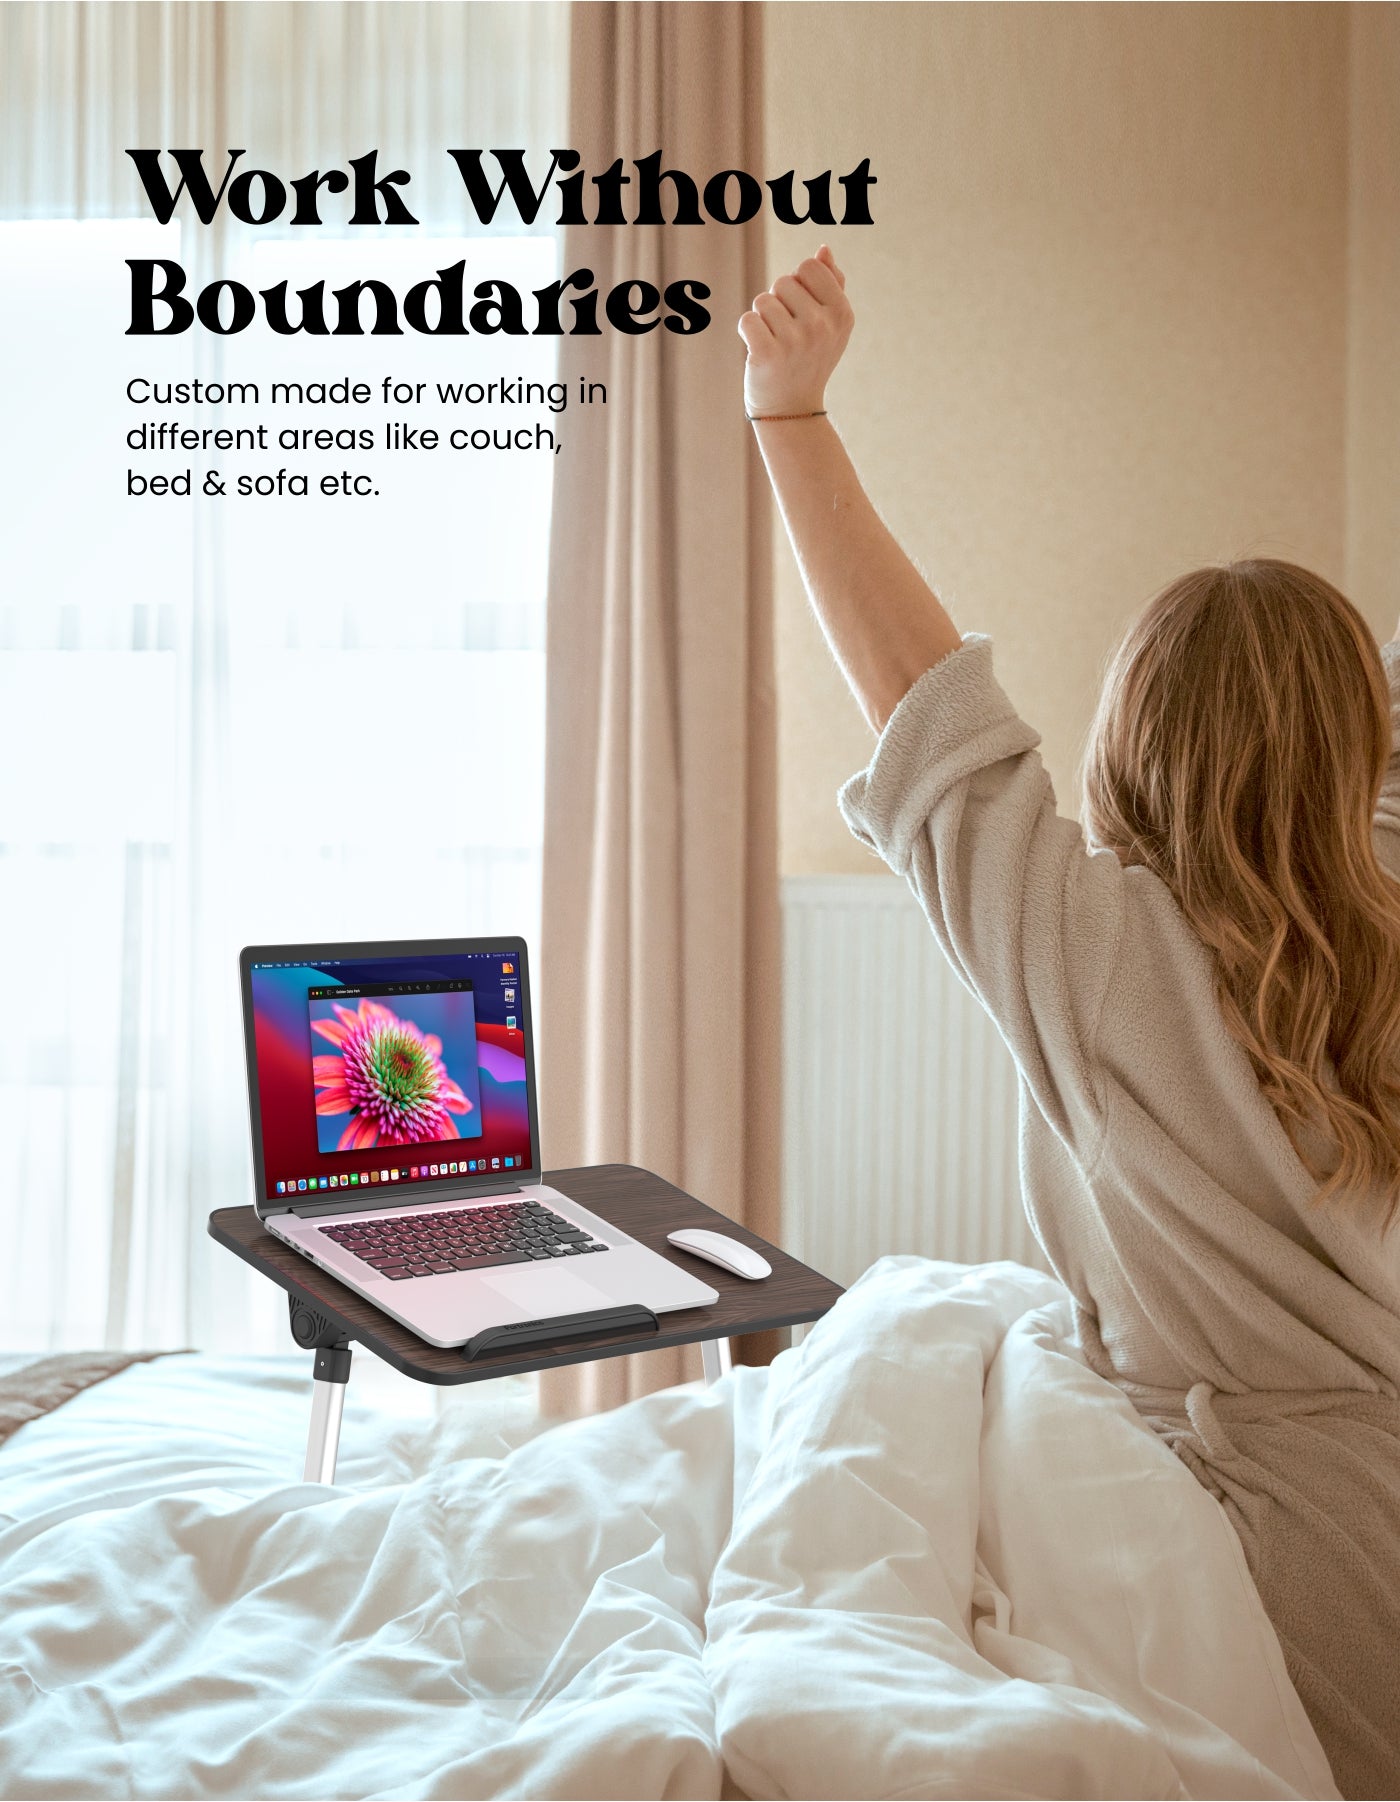 Portronics My Buddy adjustable and portable Laptop Stand for bed work without boundaries